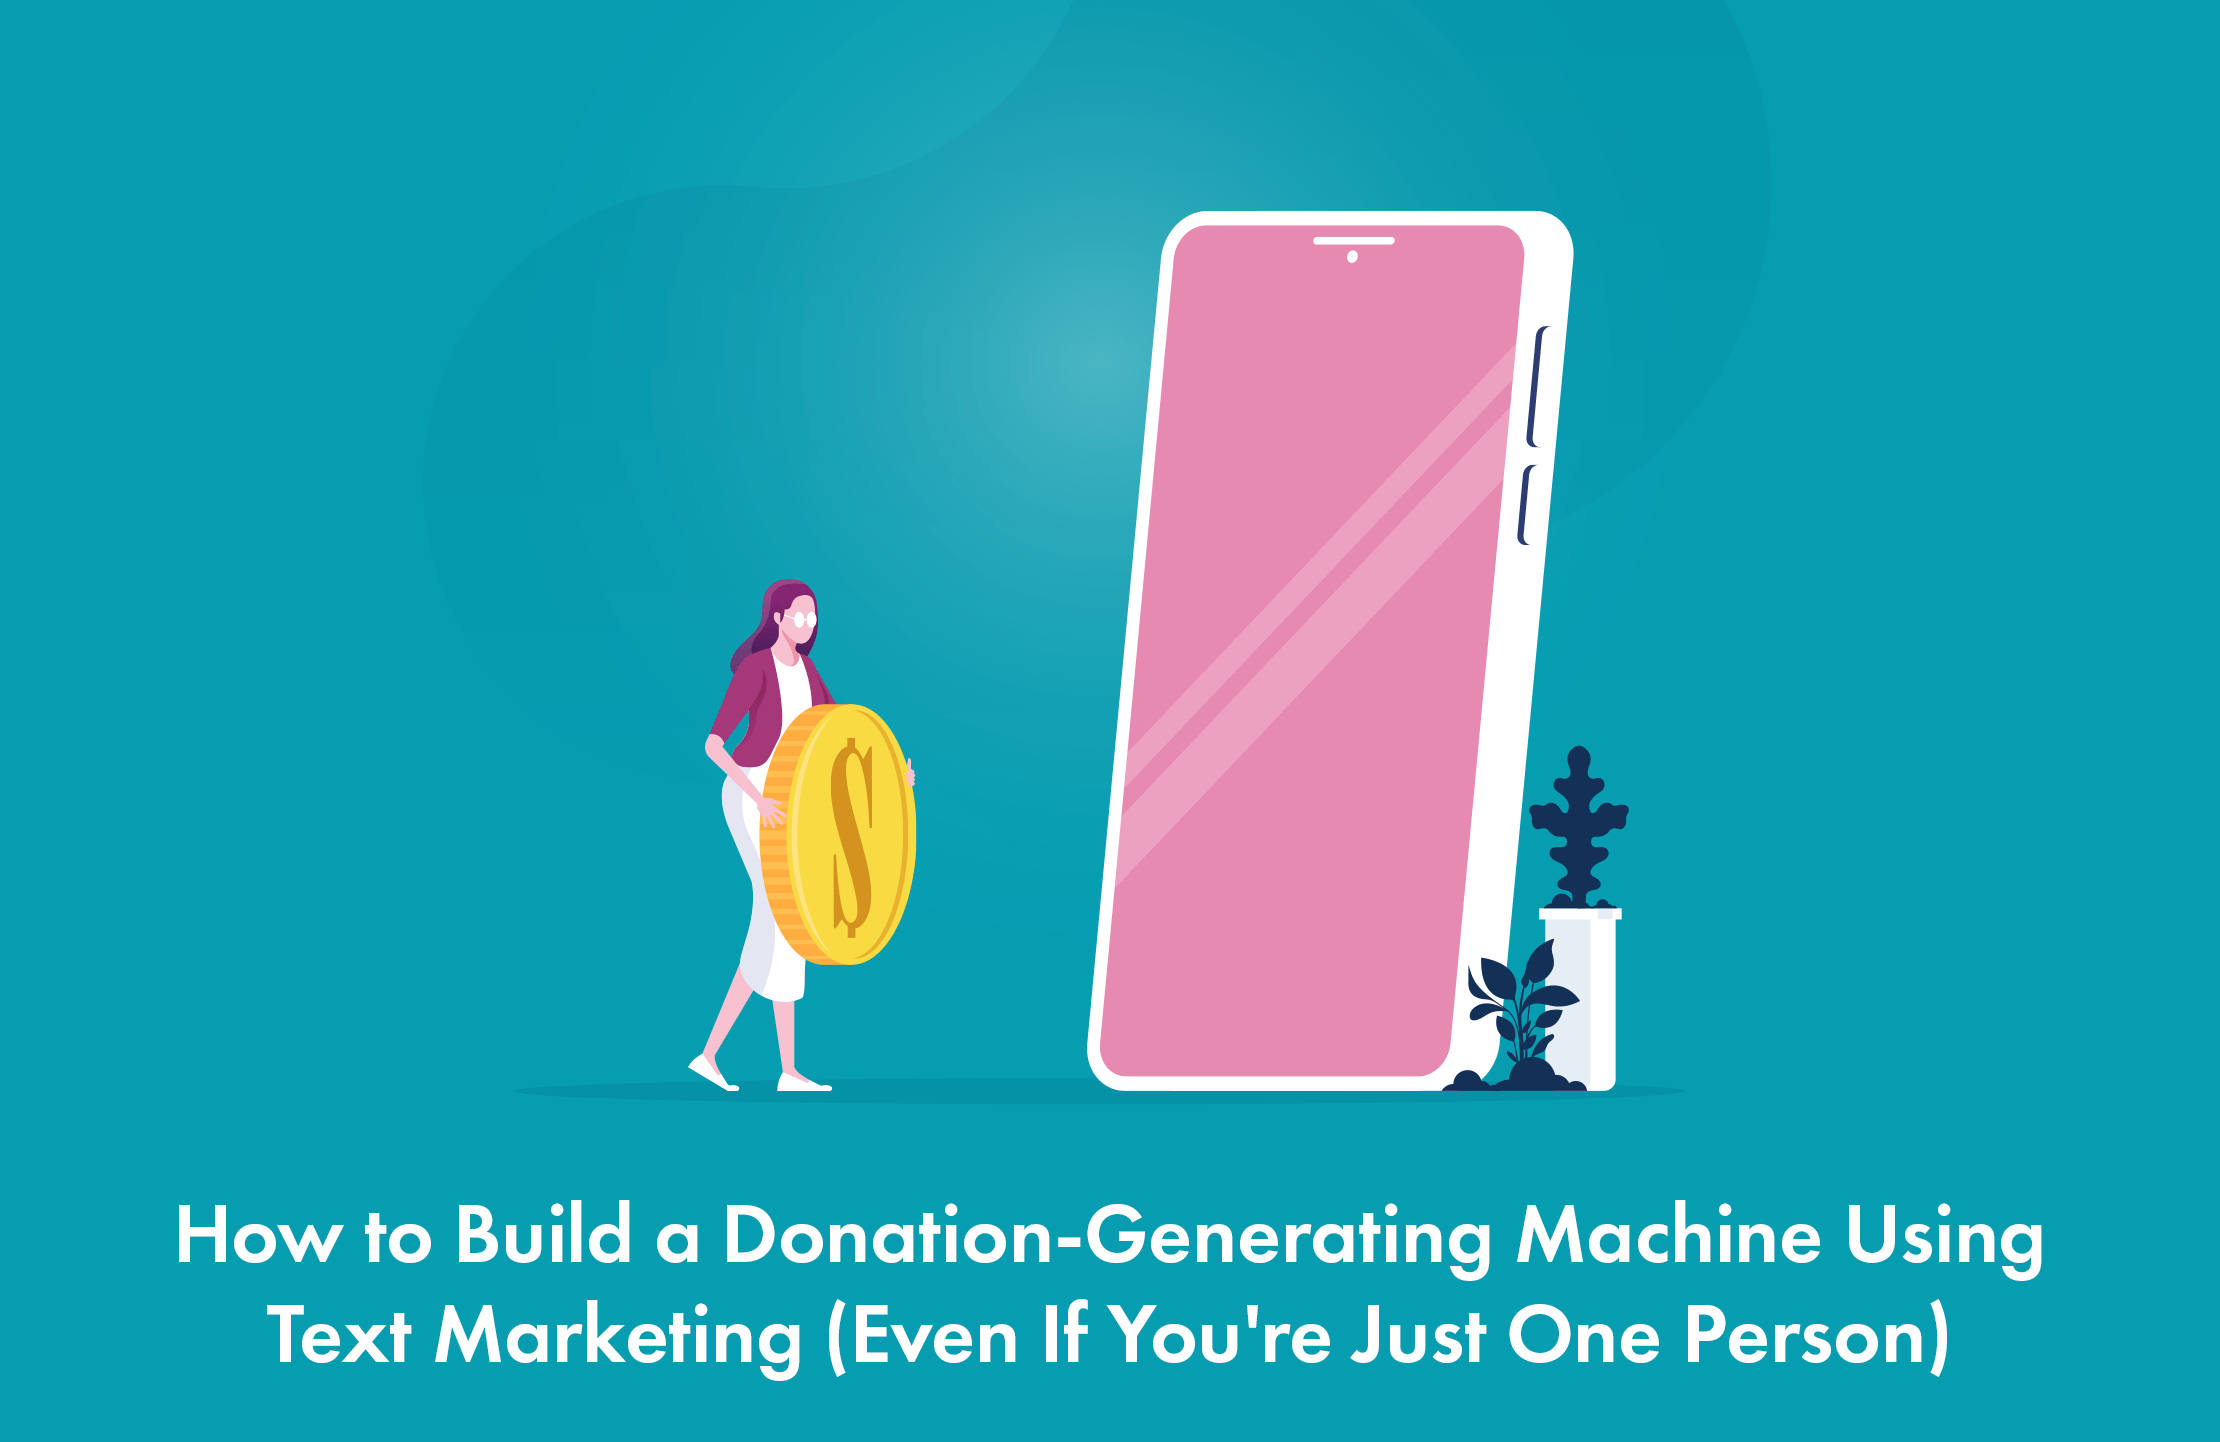 How to Build a Donation-Generating Machine Using Text Marketing